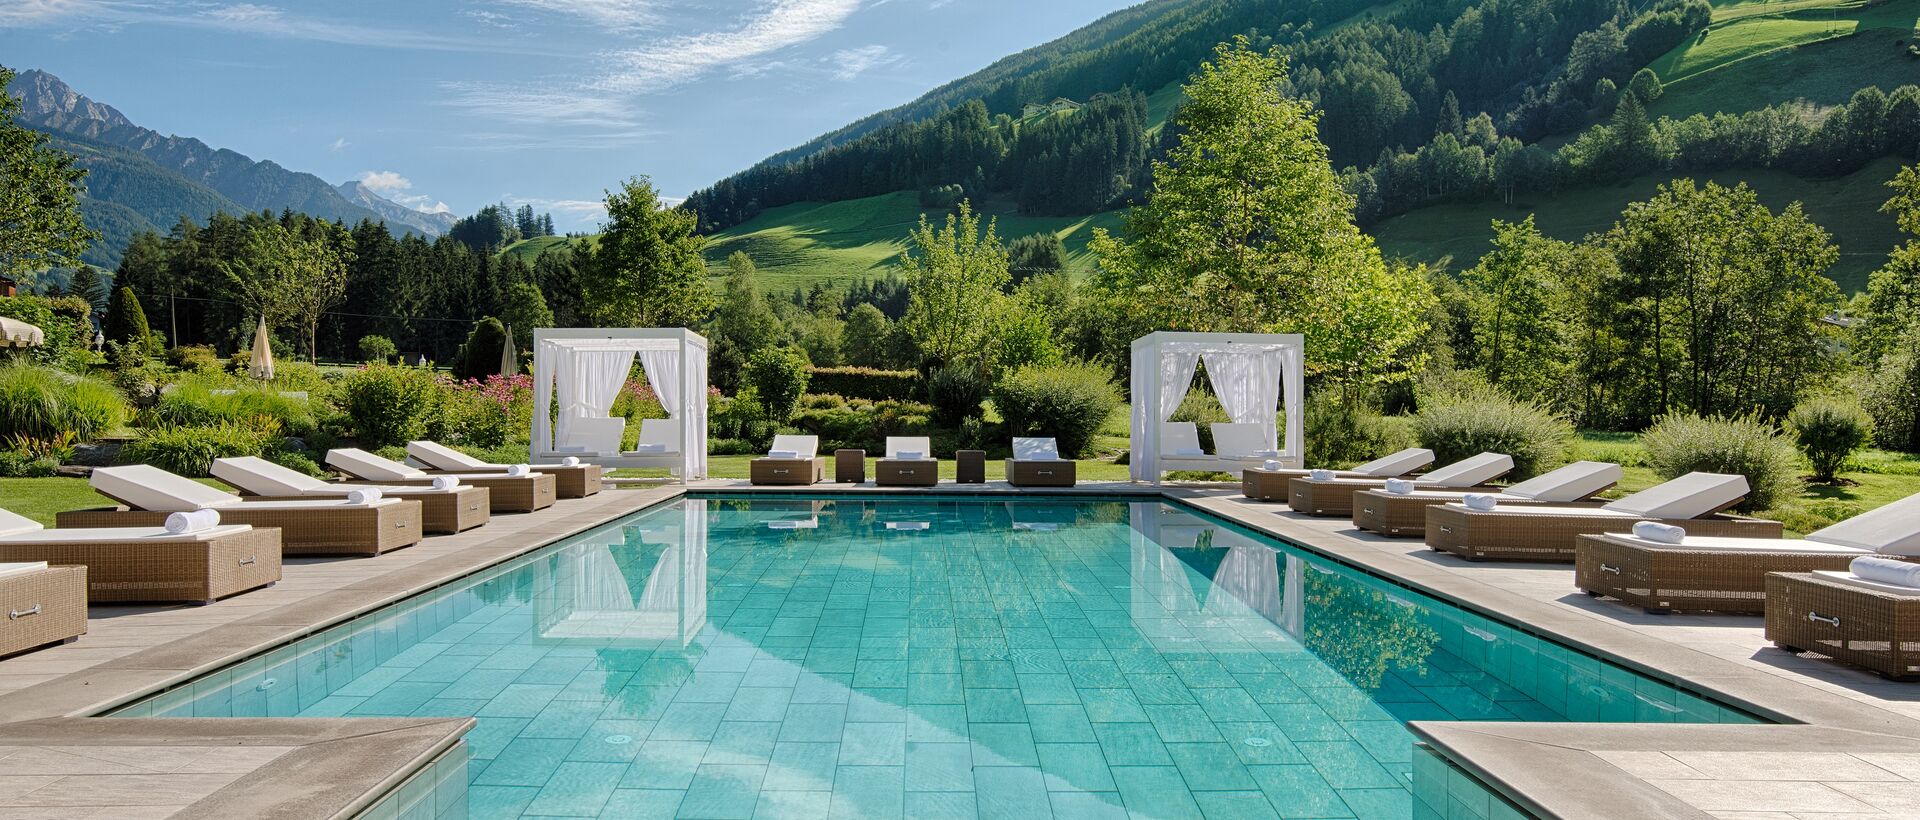 Fantastic outdoor pool of the Alpenpalace | Wellness vacation in South Tyrol